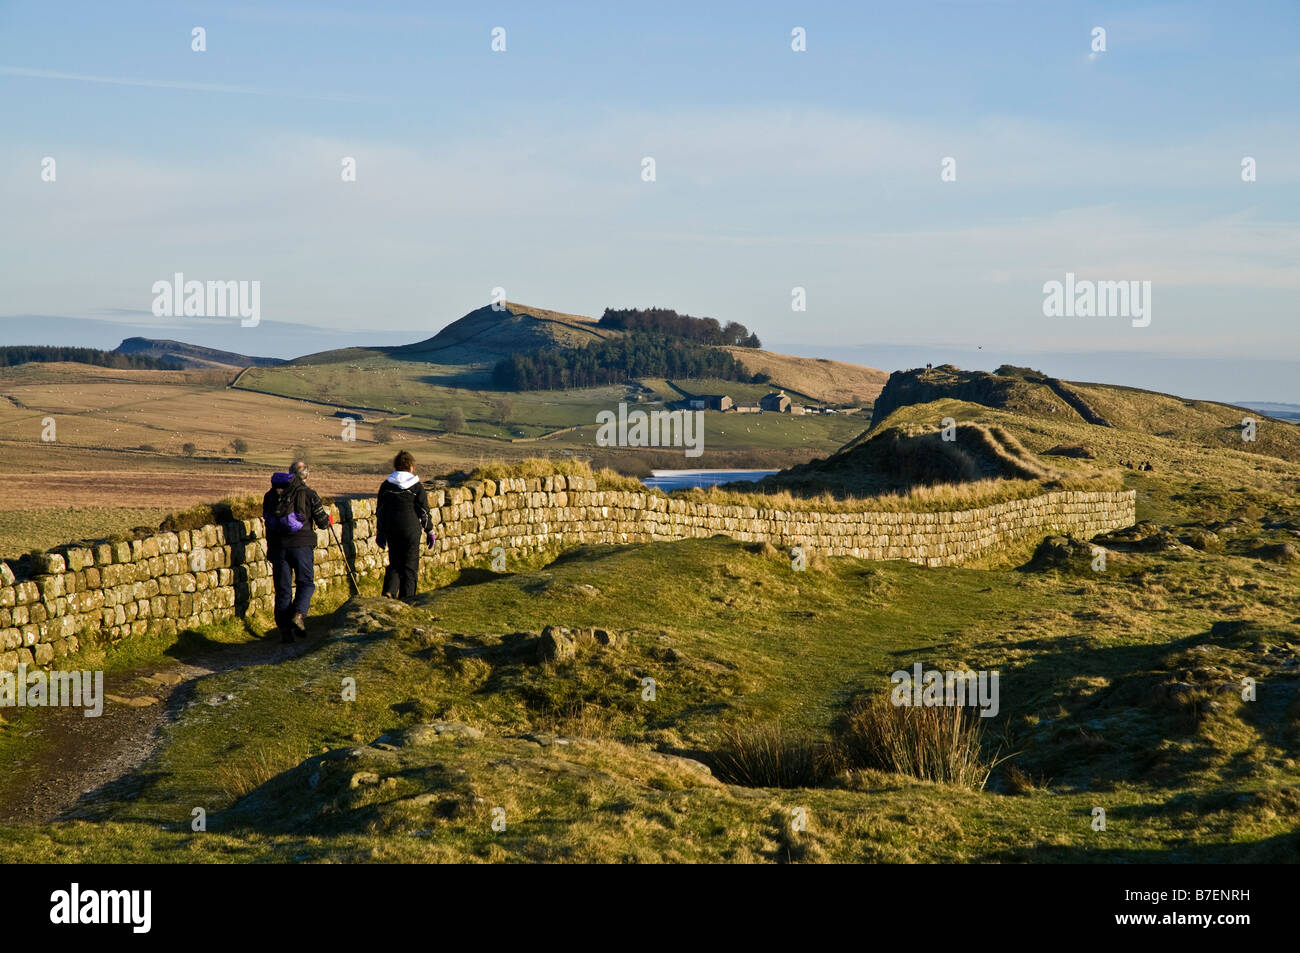 dh Steel Rigg HADRIEN WALL NORTHUMBERLAND Walkers mur romain Northumberland National Park Country northumbria marche angleterre hiver Banque D'Images